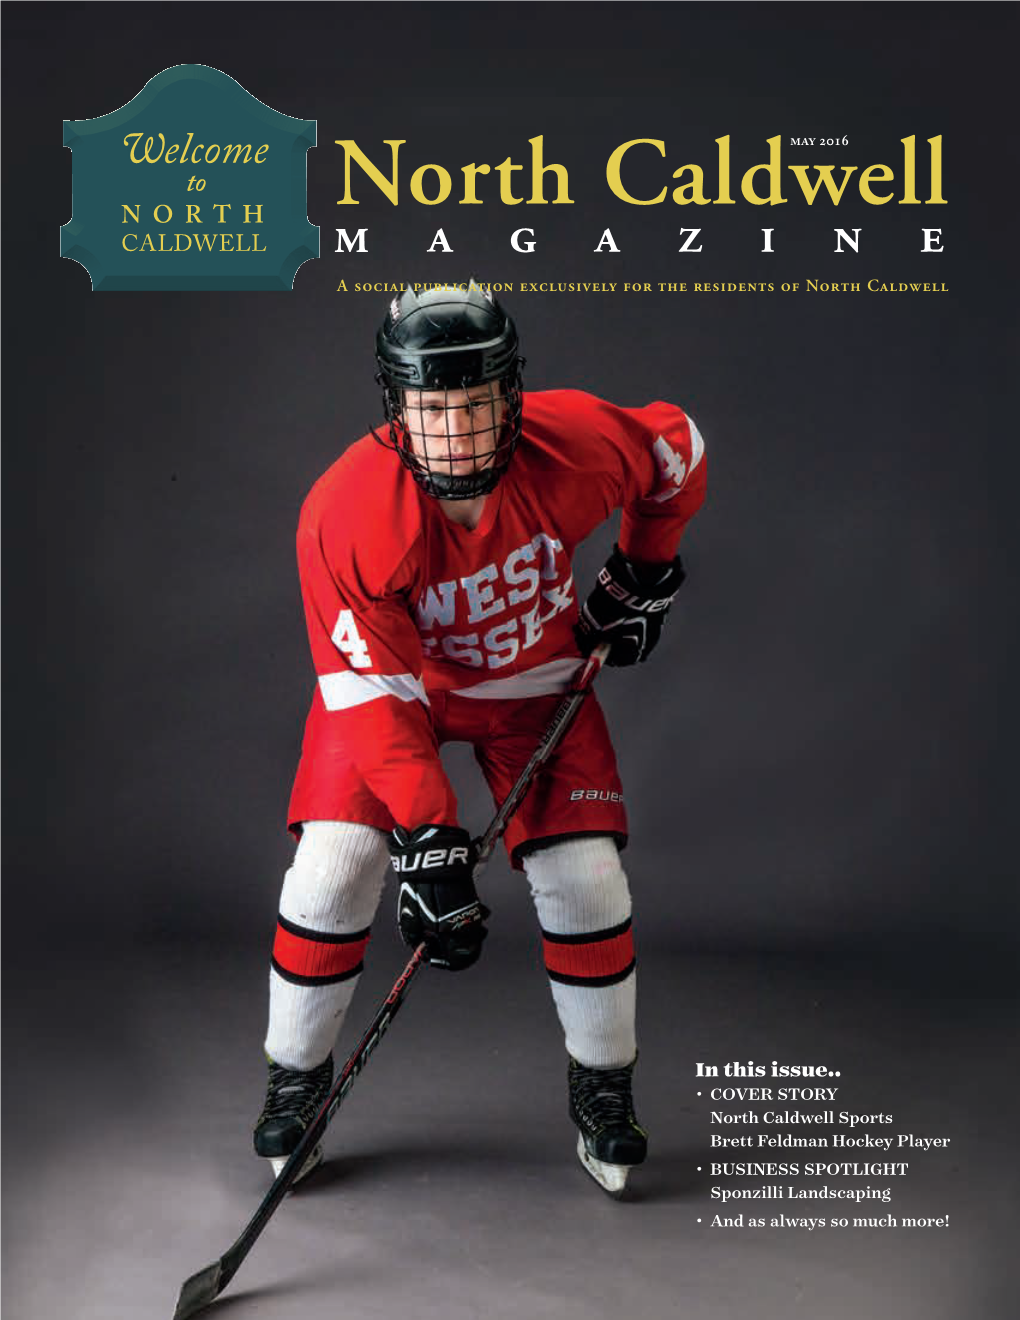 North Caldwell NORTH CALDWELL Magazine a Social Publication Exclusively for the Residents of North Caldwell